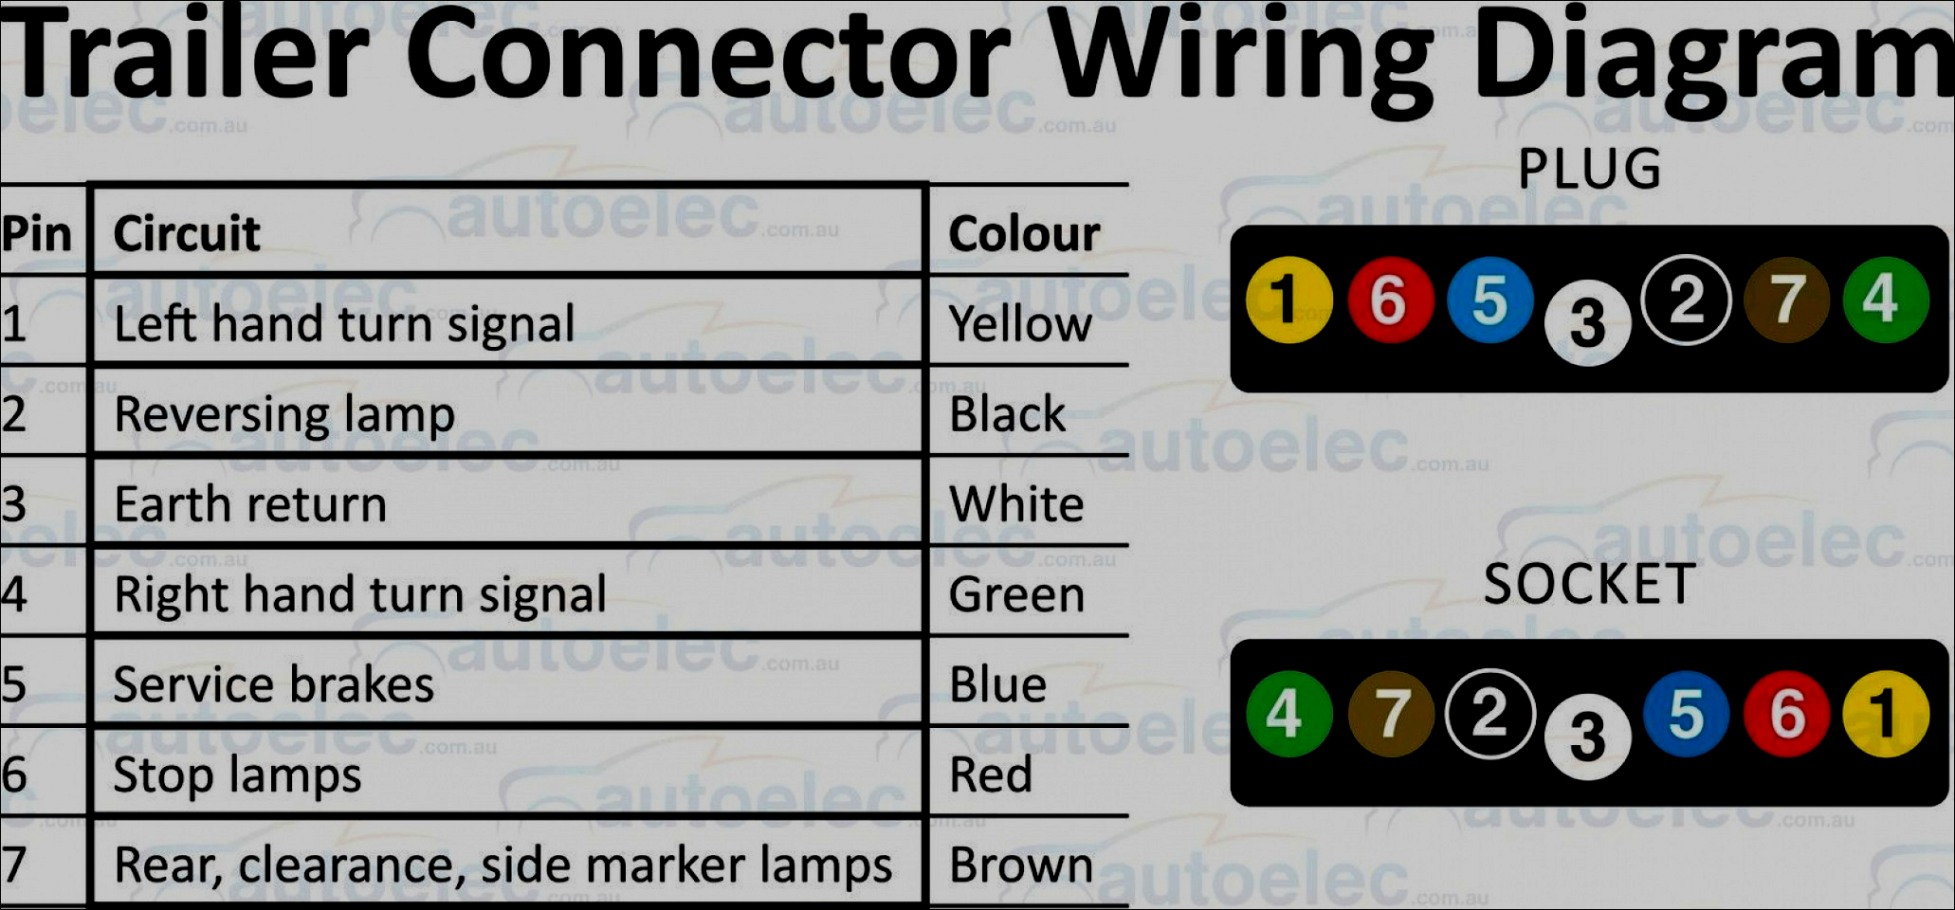 Great Of 4 Pin Trailer Connector Wiring Guides - Wiringdiagramsdraw - 4 Pin Trailer Connector Wiring Diagram